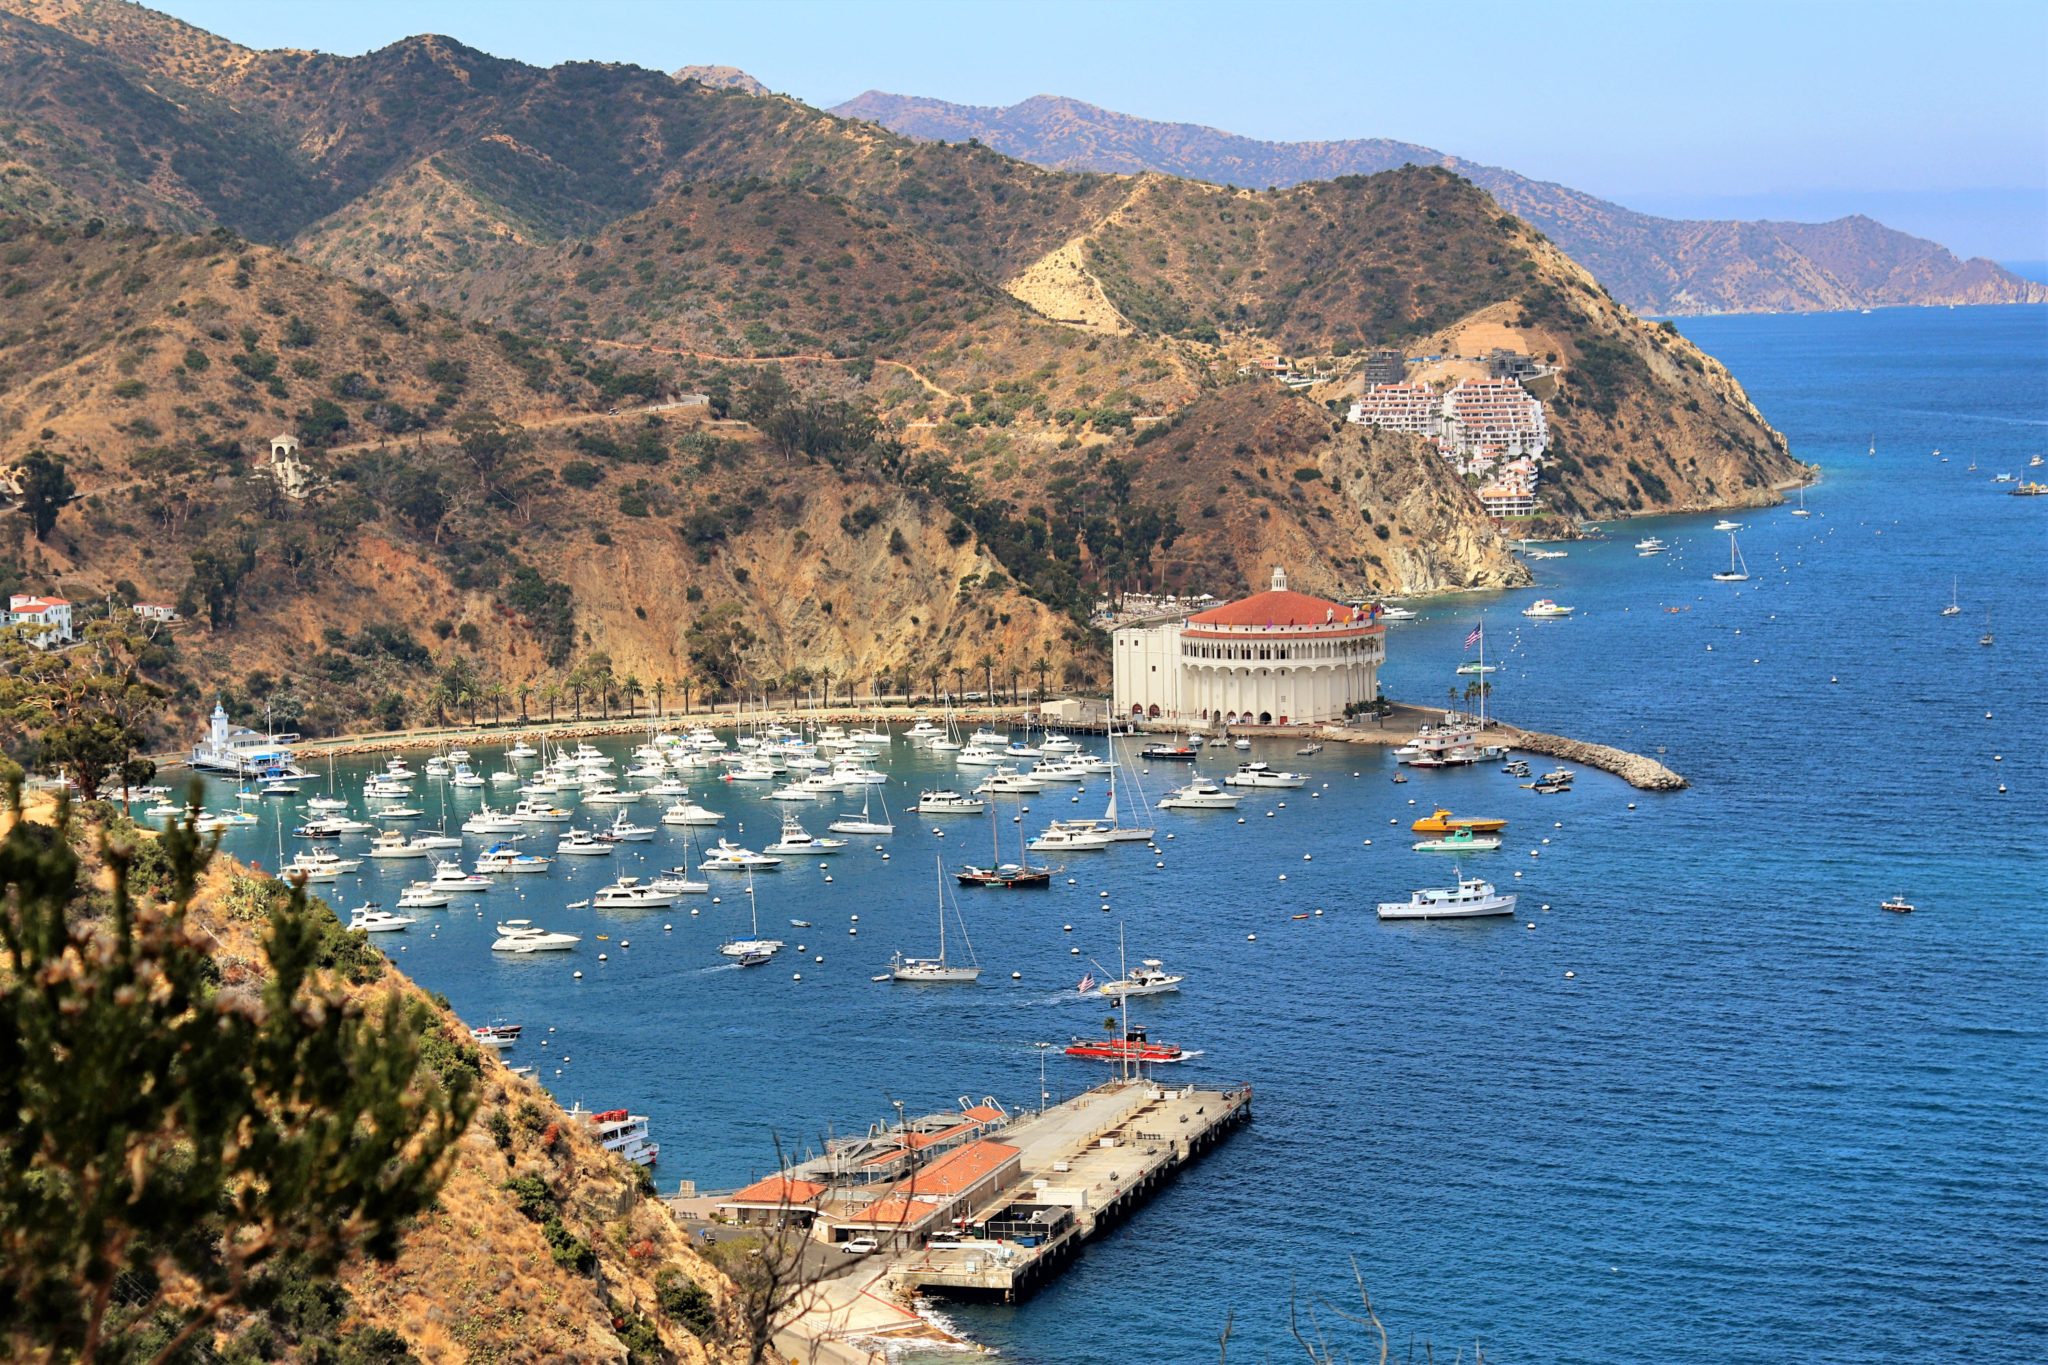 Discover the best day trip from LA | 13 awesome things to do in  LA with kids #catalinaisland #california #LA #simplywander